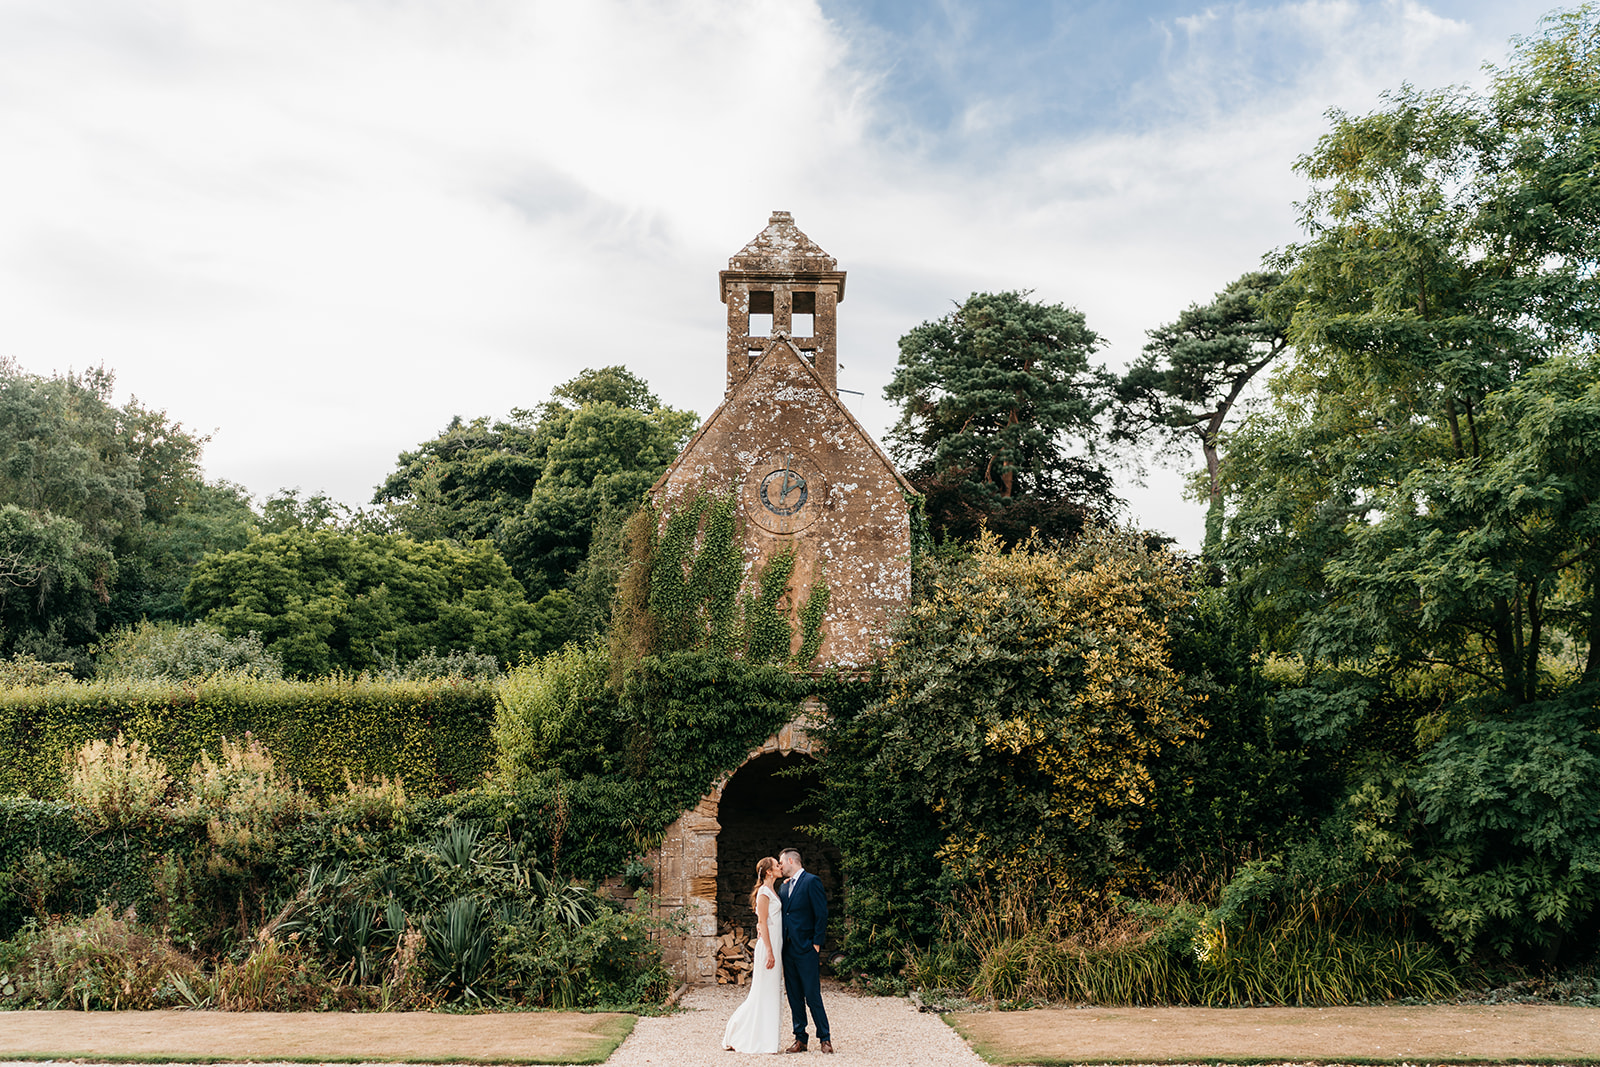 The bride and groom in front of the clock tower in Somerset